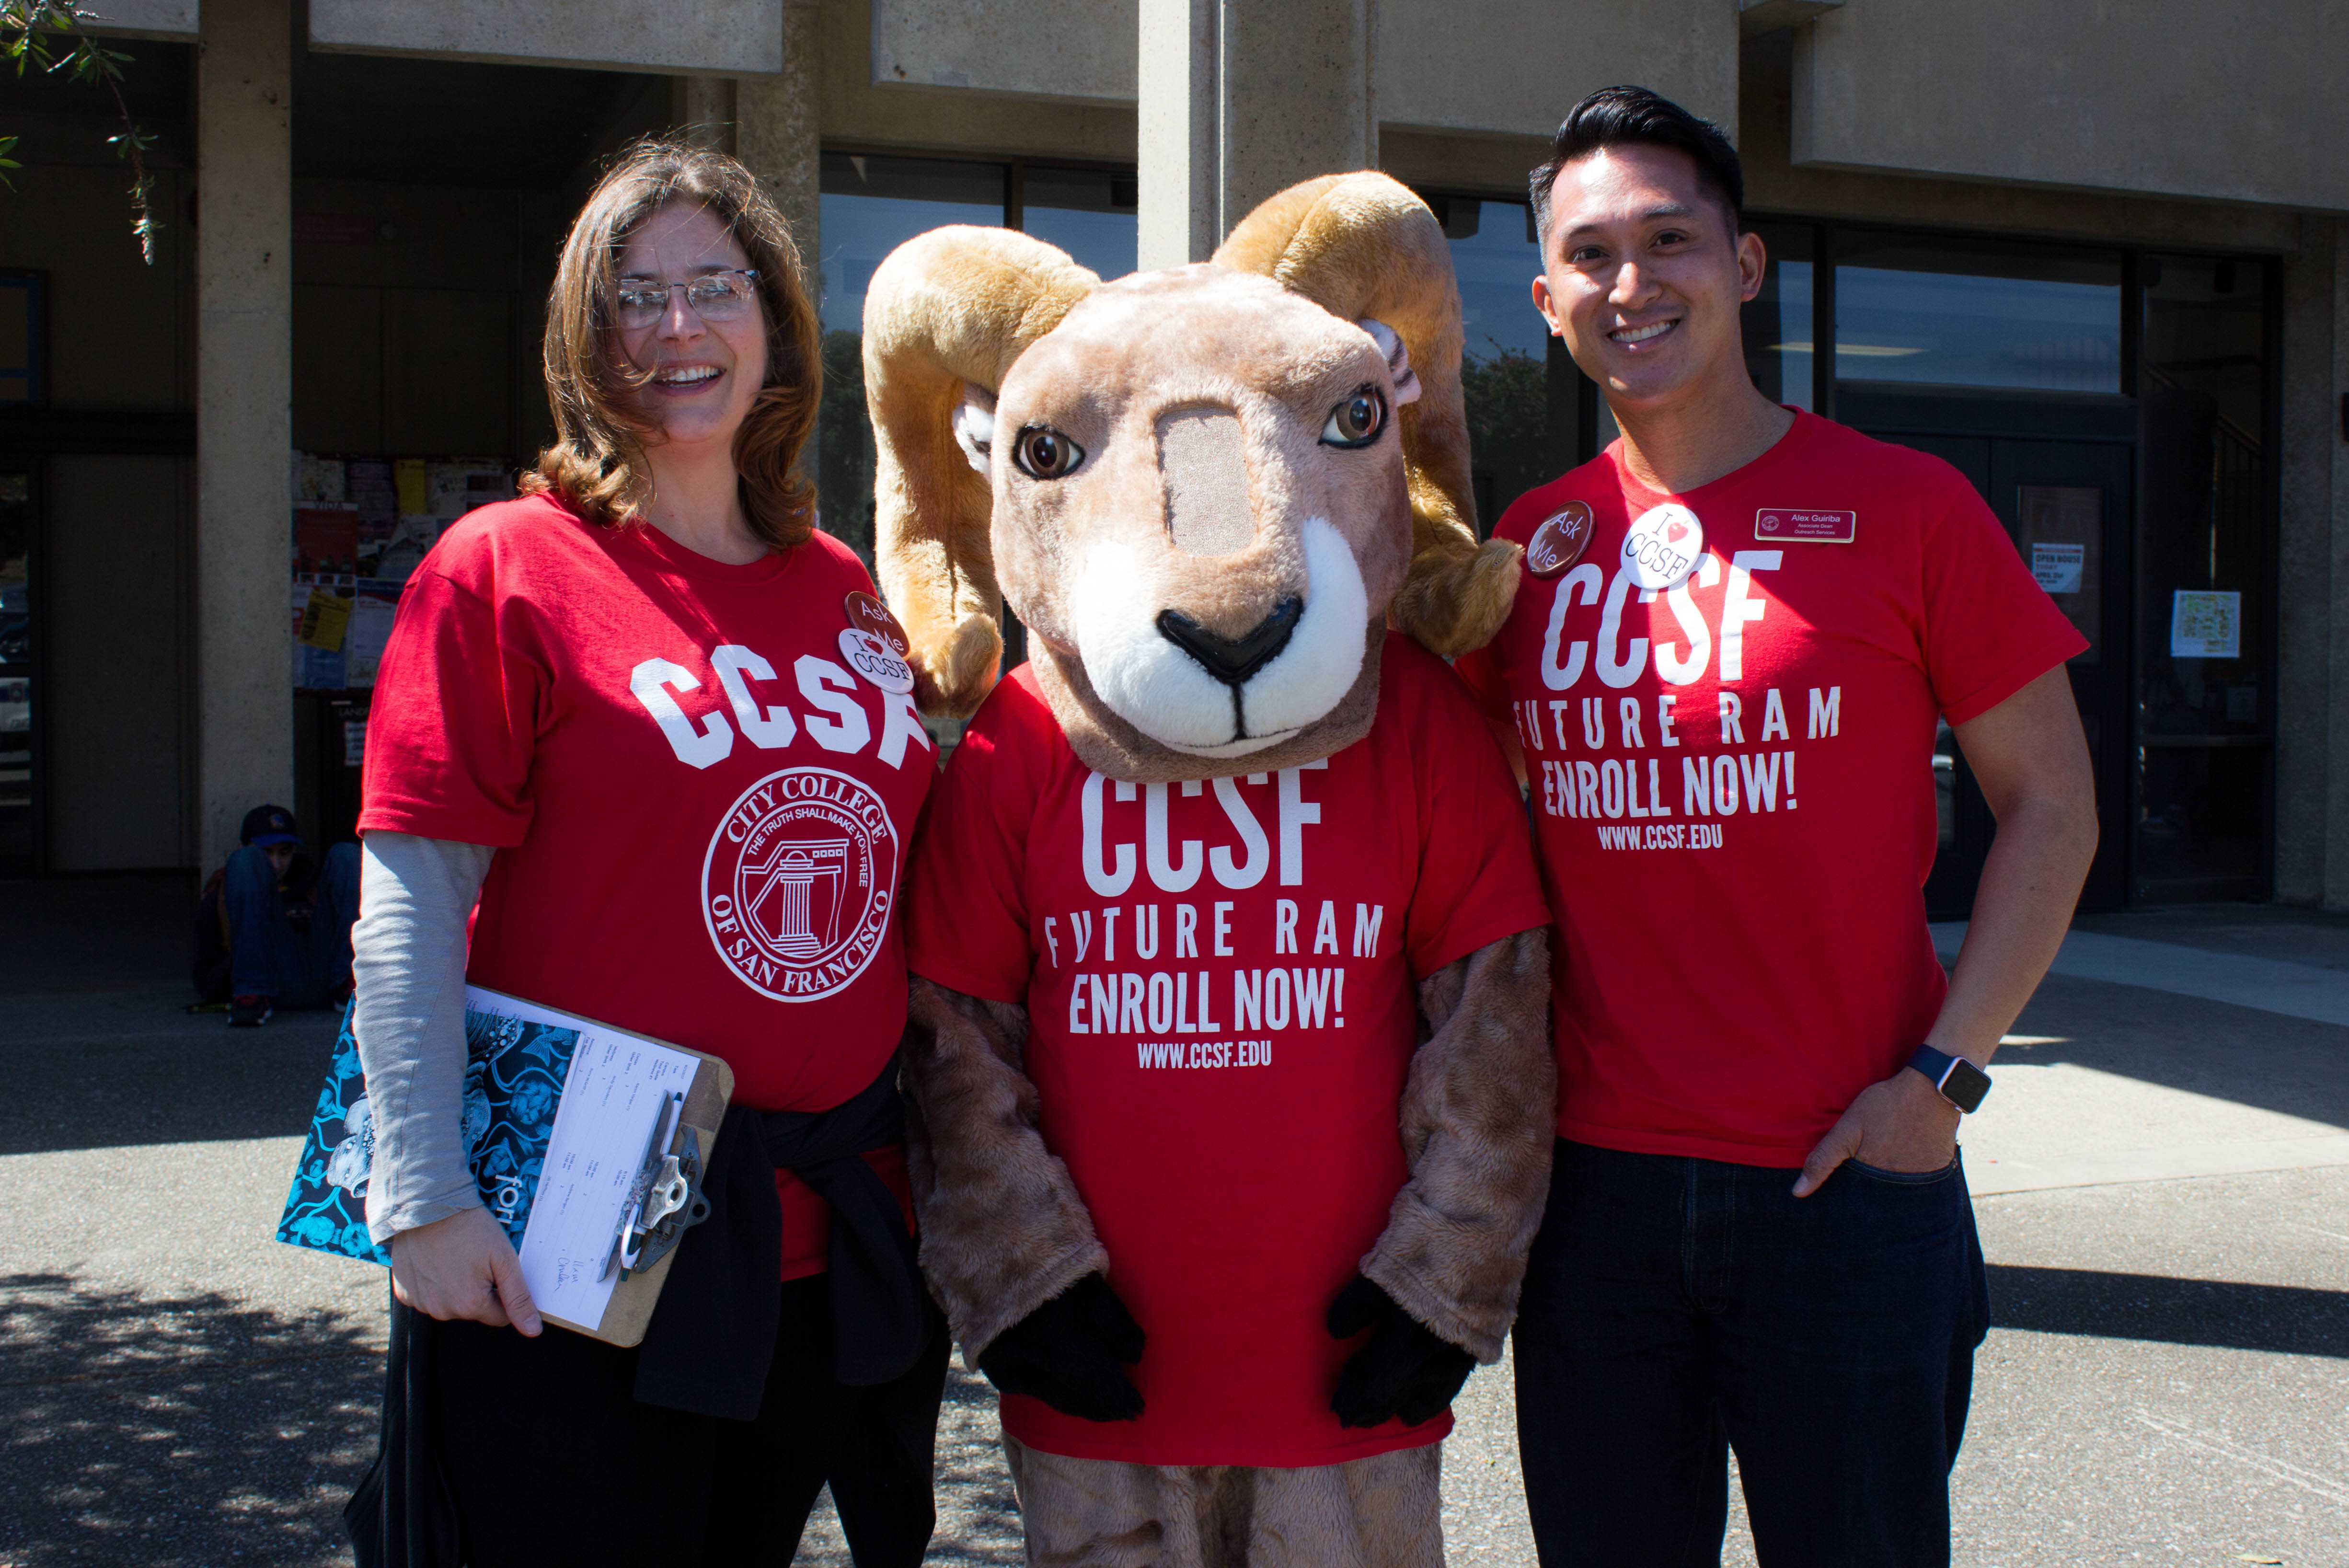 (From Left to Right) Alex Guiriba, the CCSF Ram and Kristin Charles show their support and pride of City College.